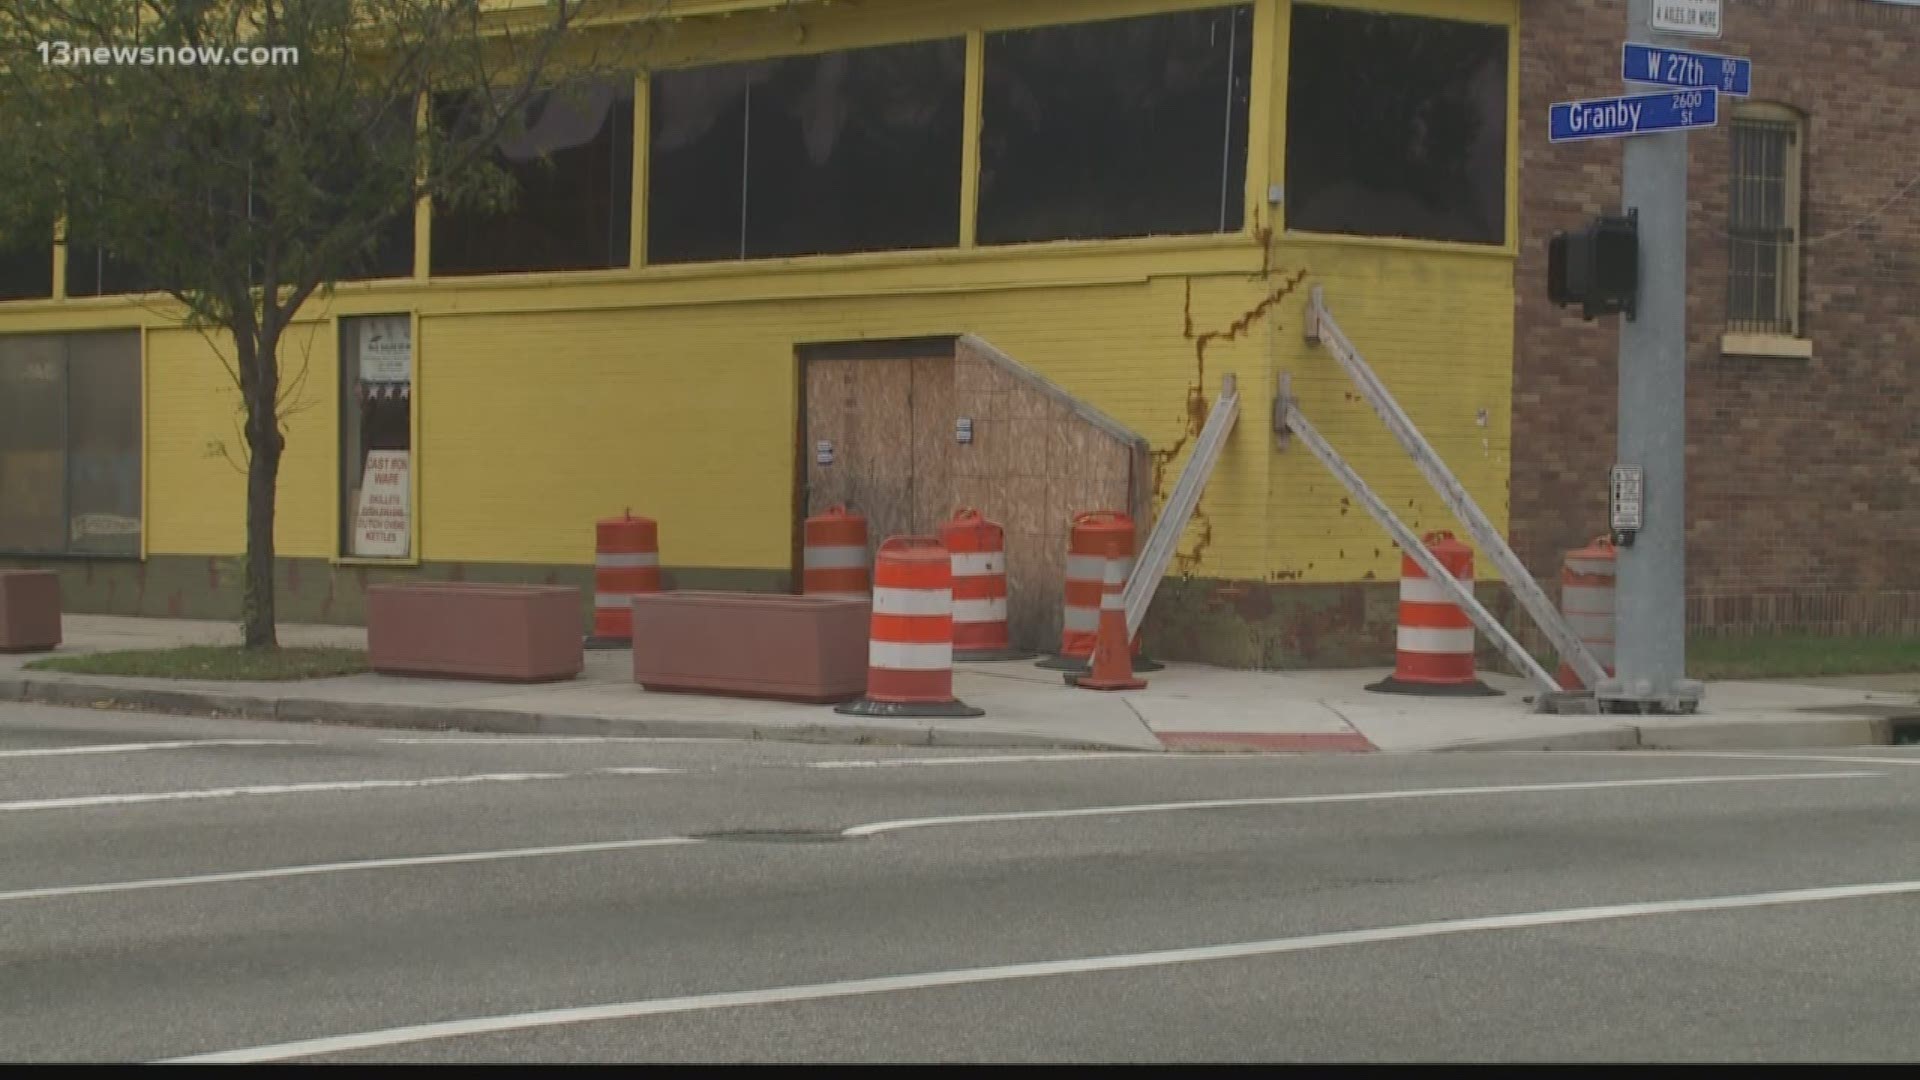 After decades of drivers crashing into M&G Supplies at Granby and 27th streets, the city placed concrete barriers in hopes of this being a permanent solution.